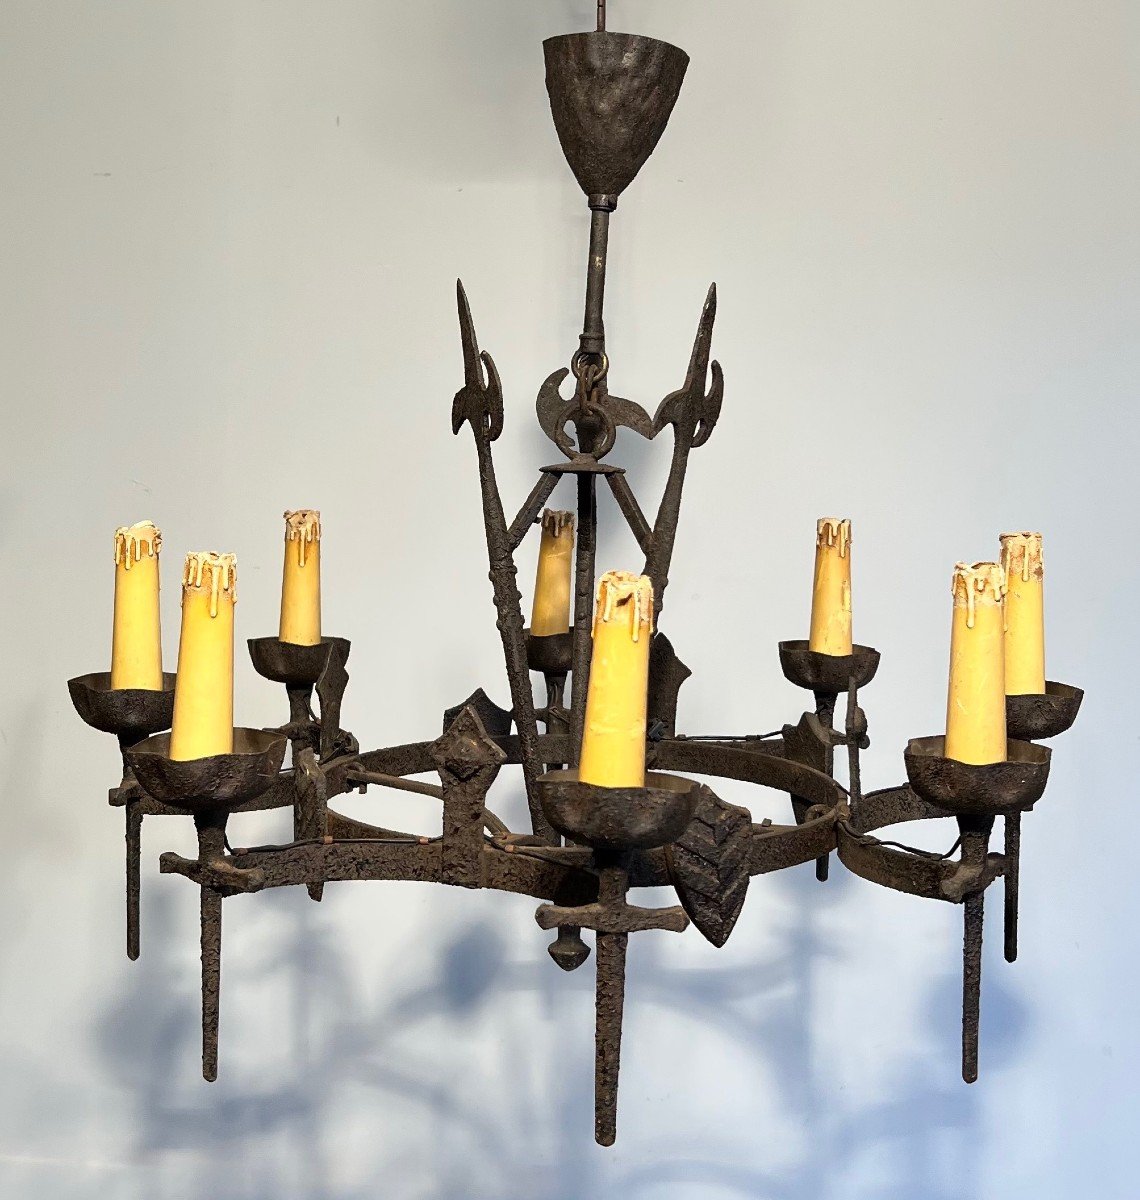 Gothic Style Wrought Iron Chandelier With 8 Arms Of Light. This Chandelier Is Part Of A Rare Set-photo-6